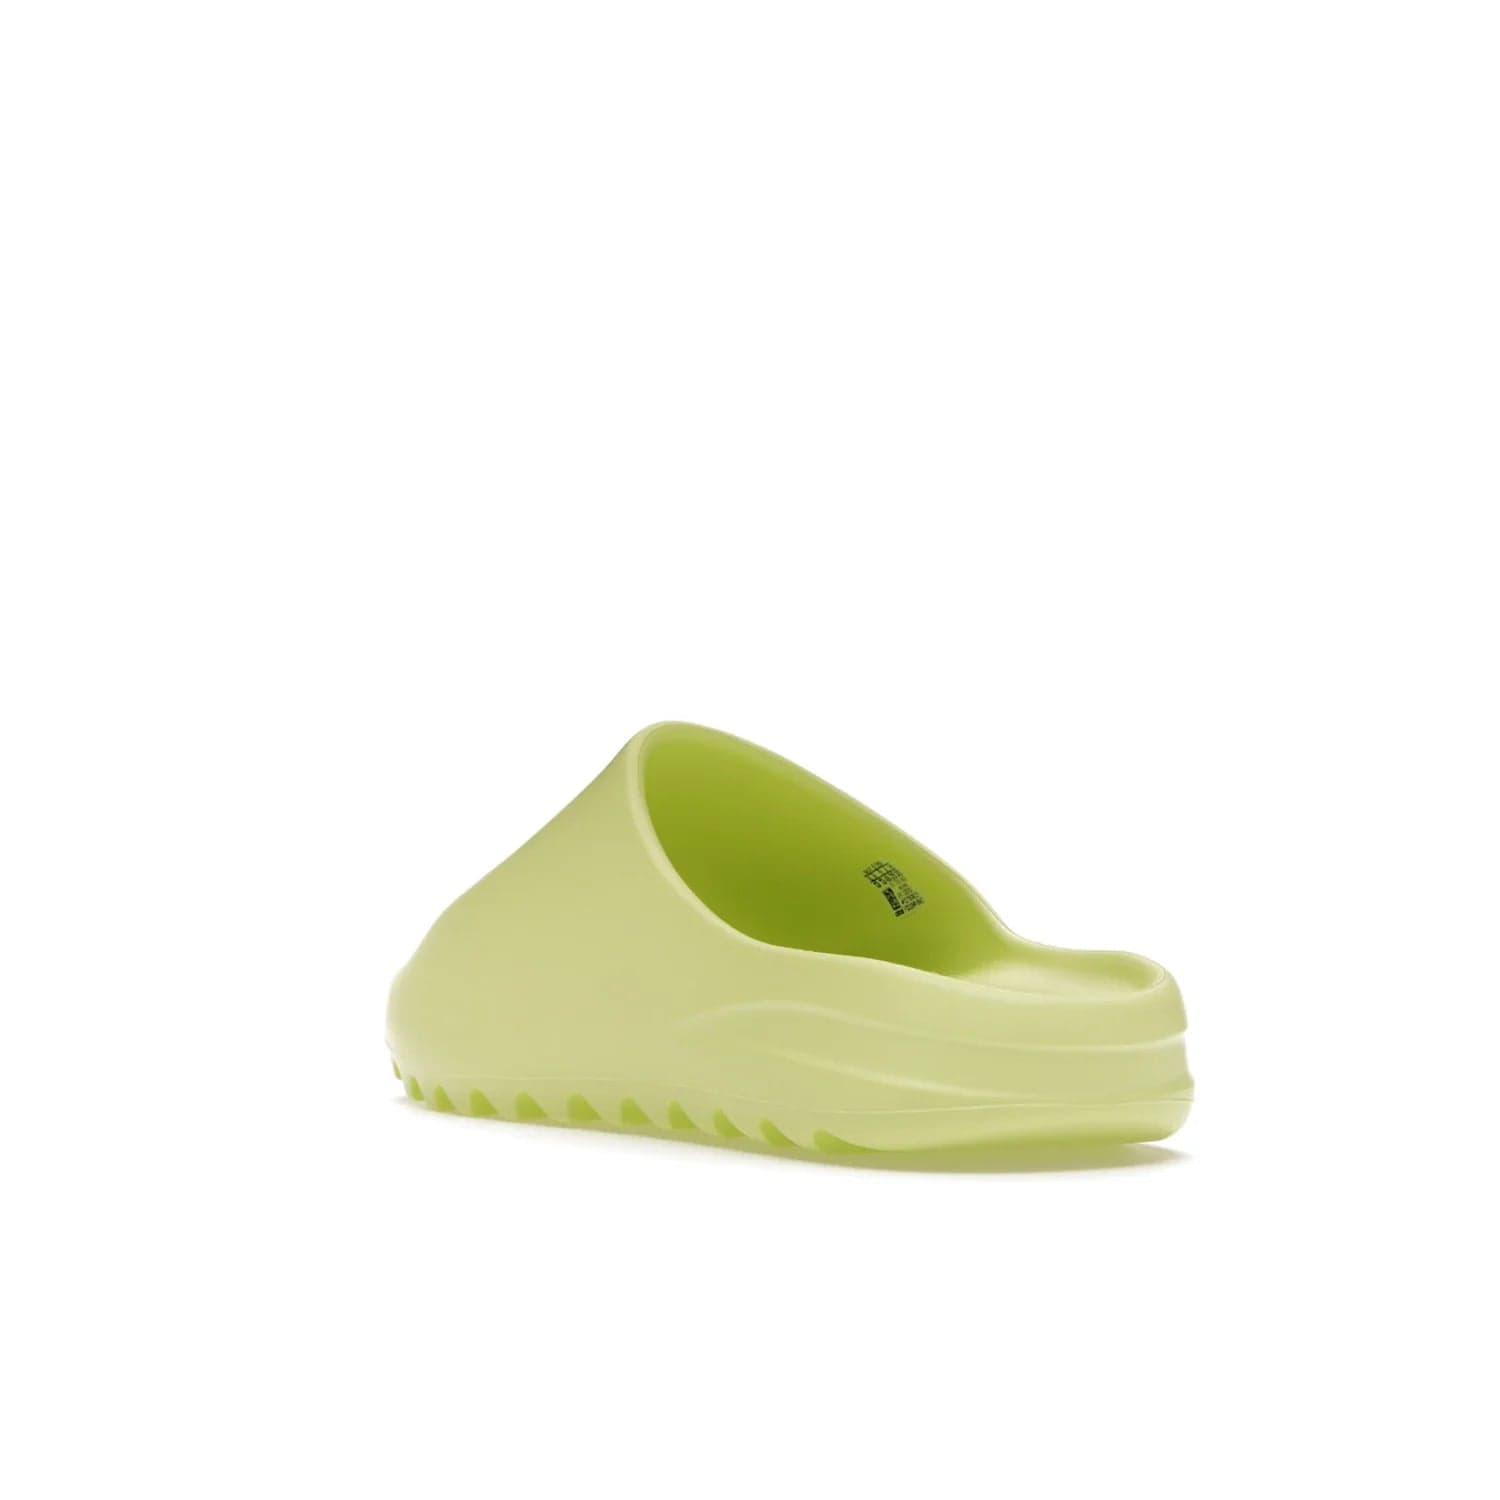 adidas Yeezy Slide Glow Green - Image 25 - Only at www.BallersClubKickz.com - Experience an unexpected summer style with the adidas Yeezy Slide Glow Green. This limited edition slide sandal provides a lightweight and durable construction and a bold Glow Green hue. Strategic grooves enhance traction and provide all-day comfort. Make a statement with the adidas Yeezy Slide Glow Green.